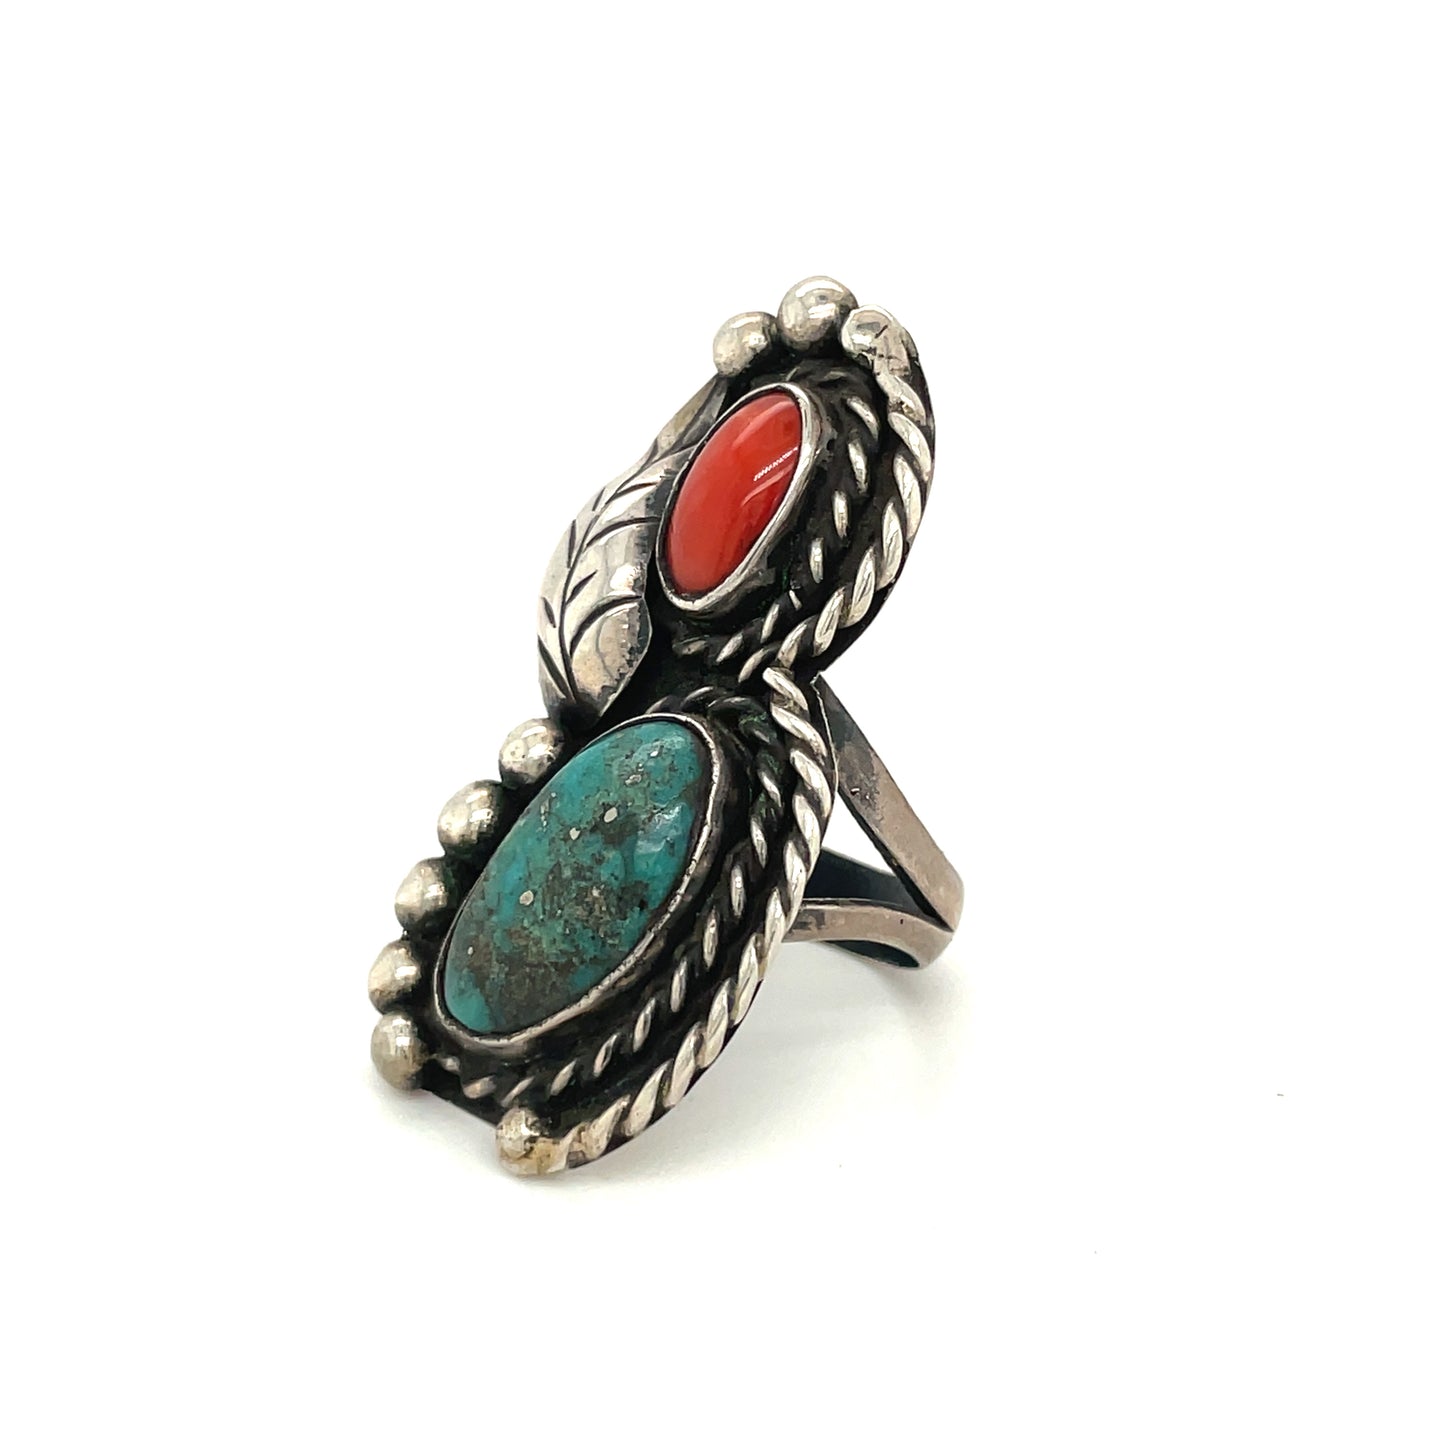 Vintage Southwestern Sterling Silver Turquoise and Coral Ring Size 6